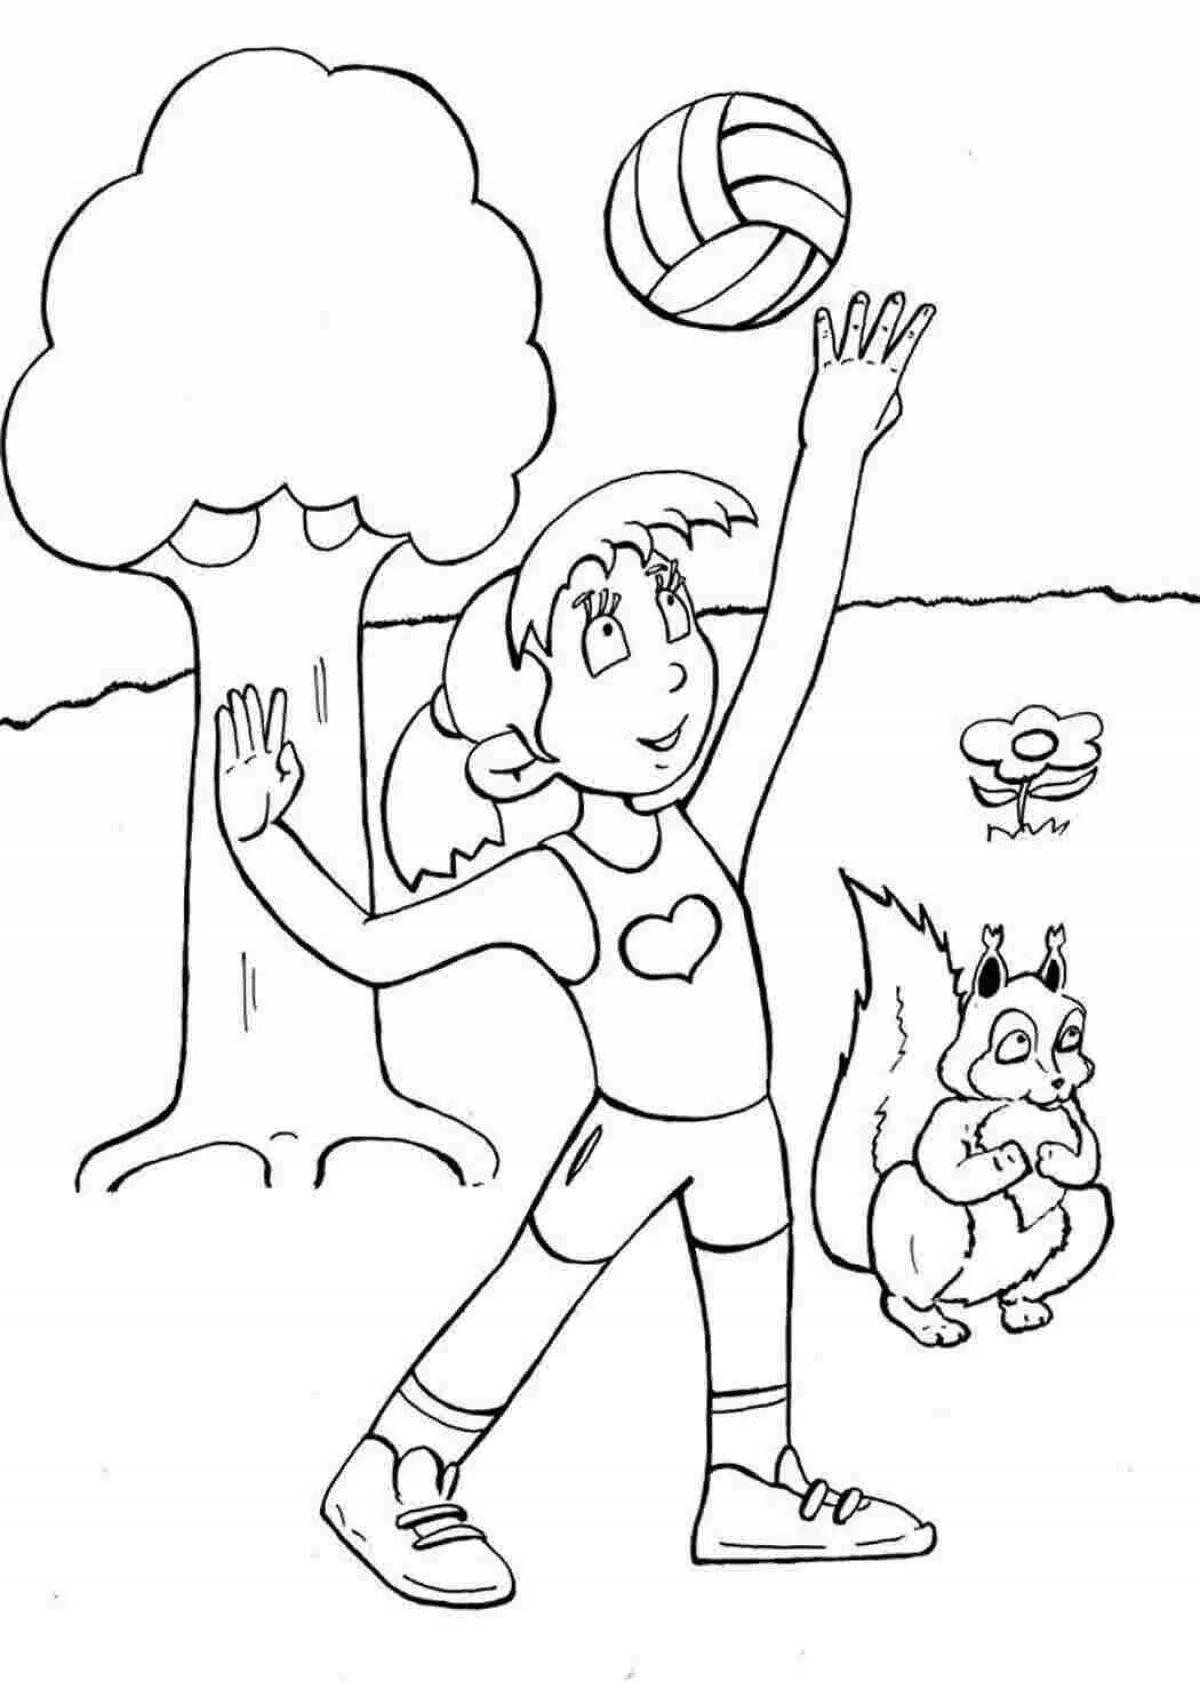 Attractive healthy mind in a healthy body coloring book for kids